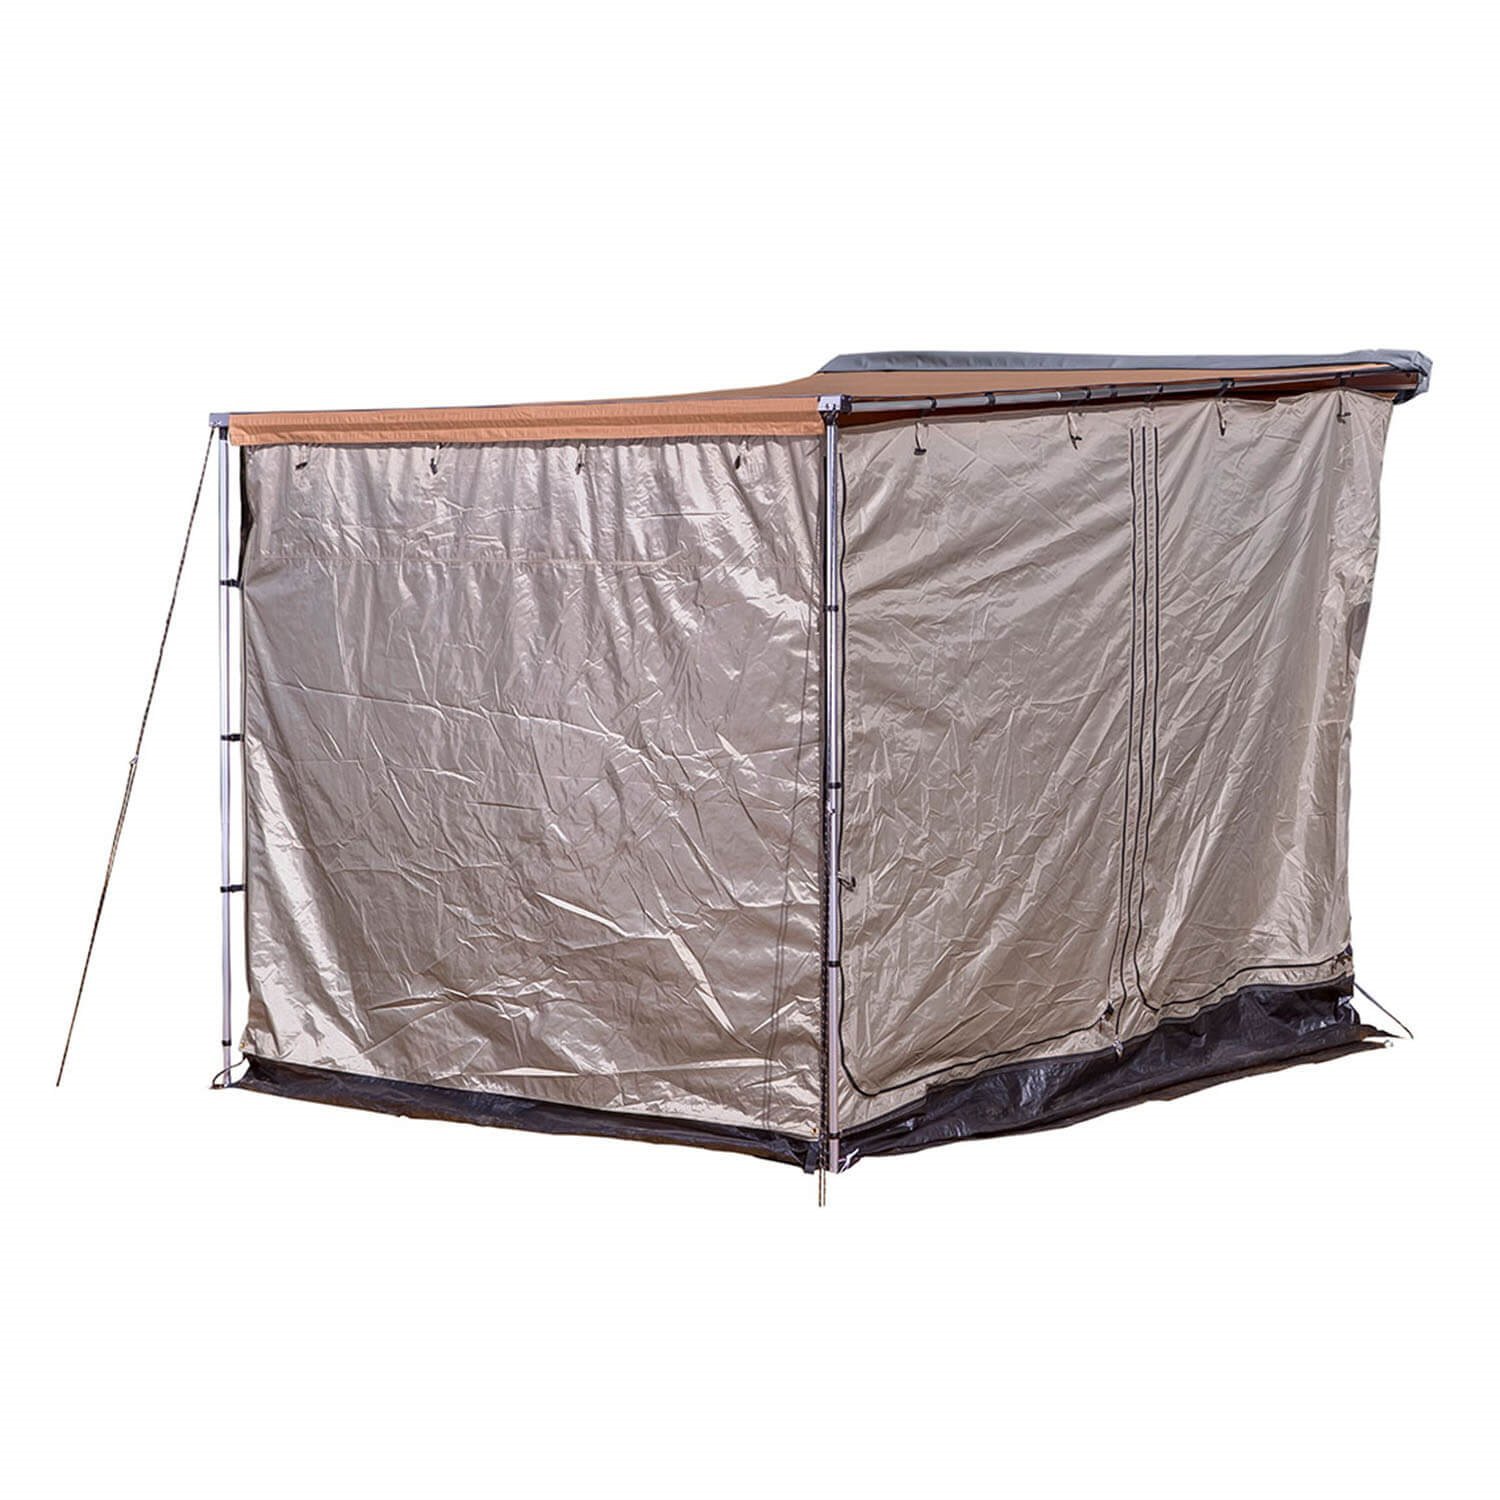 813208A Deluxe Awning Room With Floor